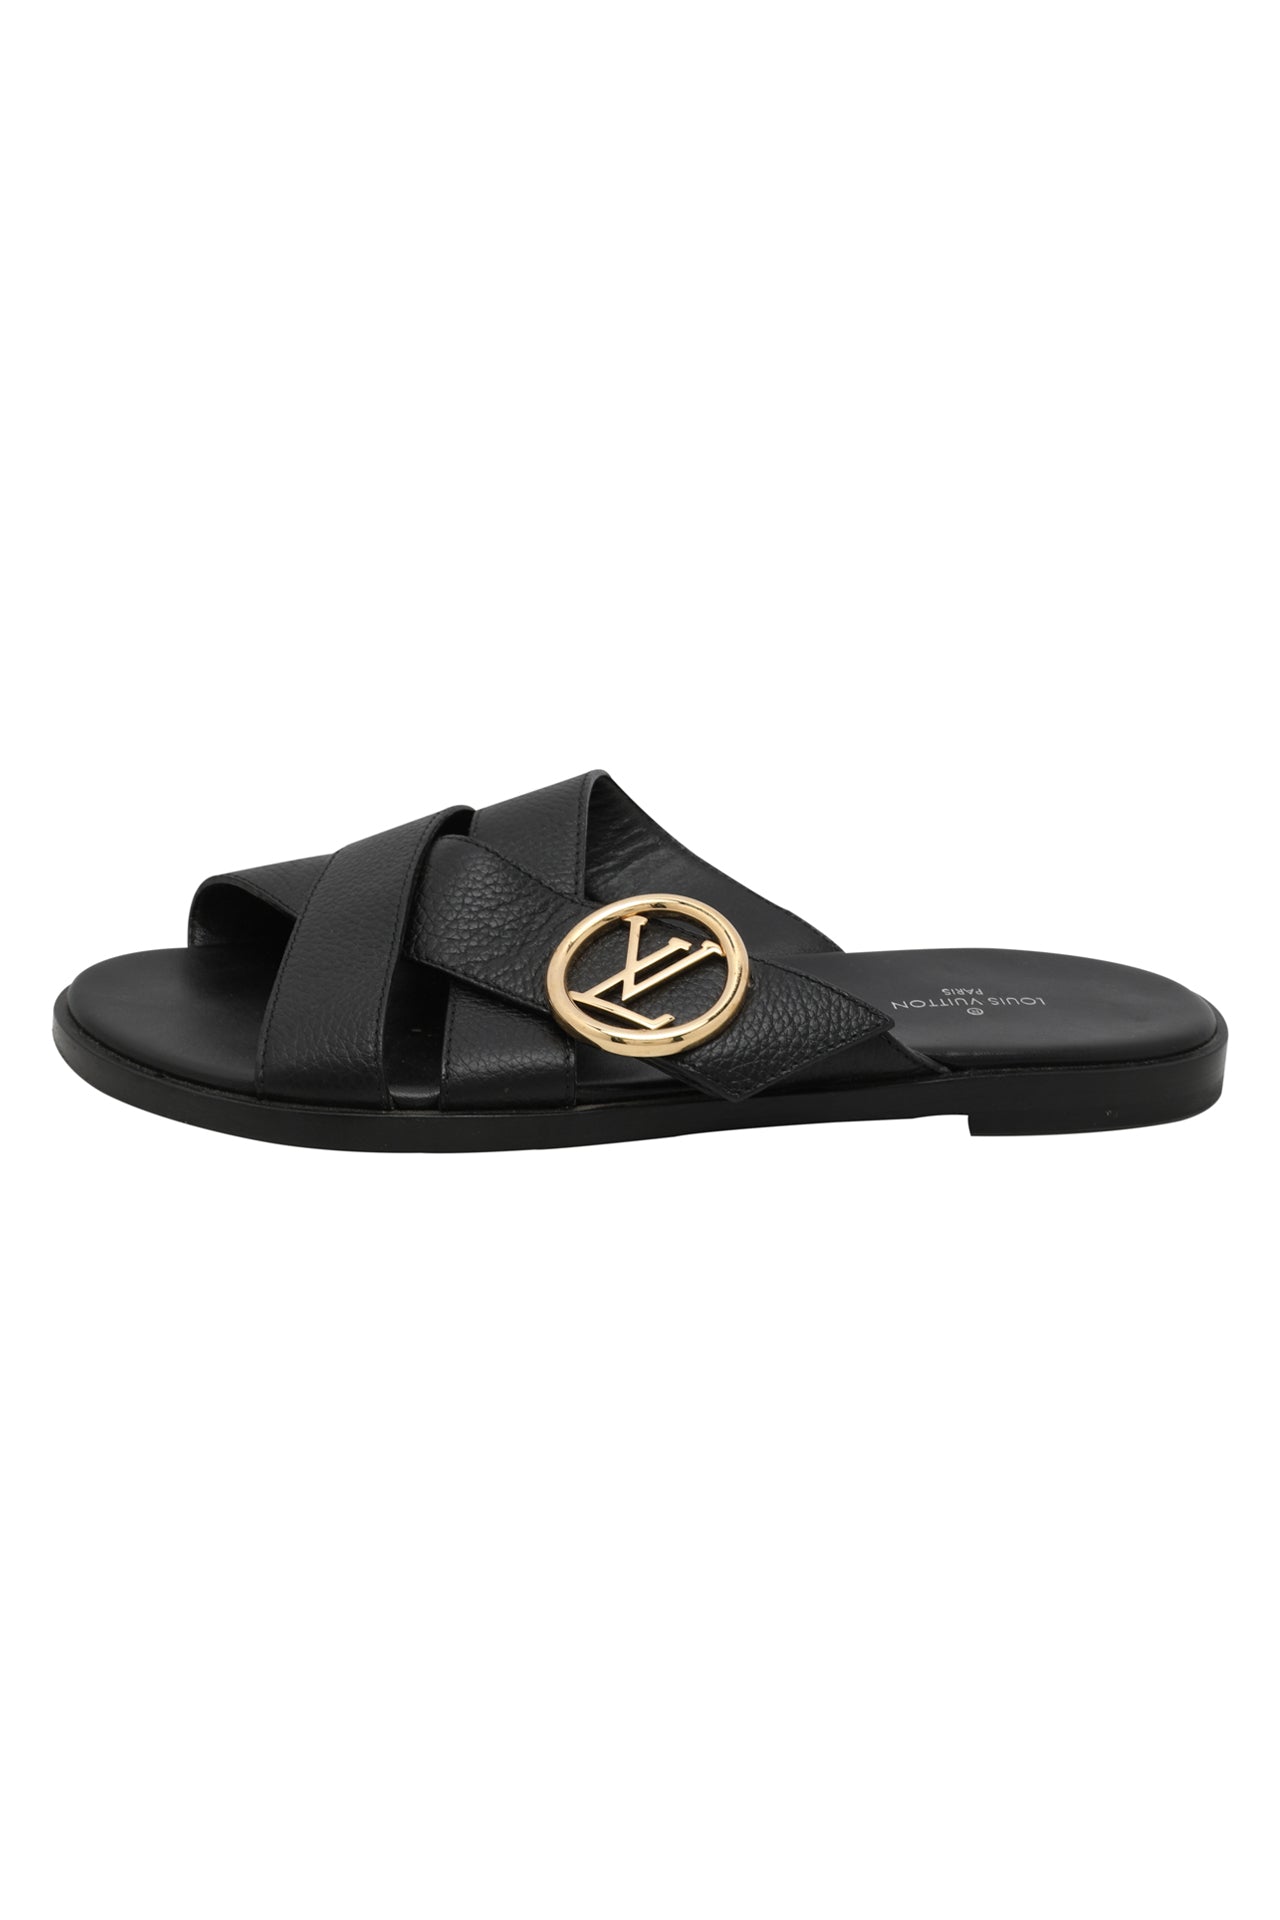 Louis Vuitton Monogram Cross Strap Slippers In Black And Brown